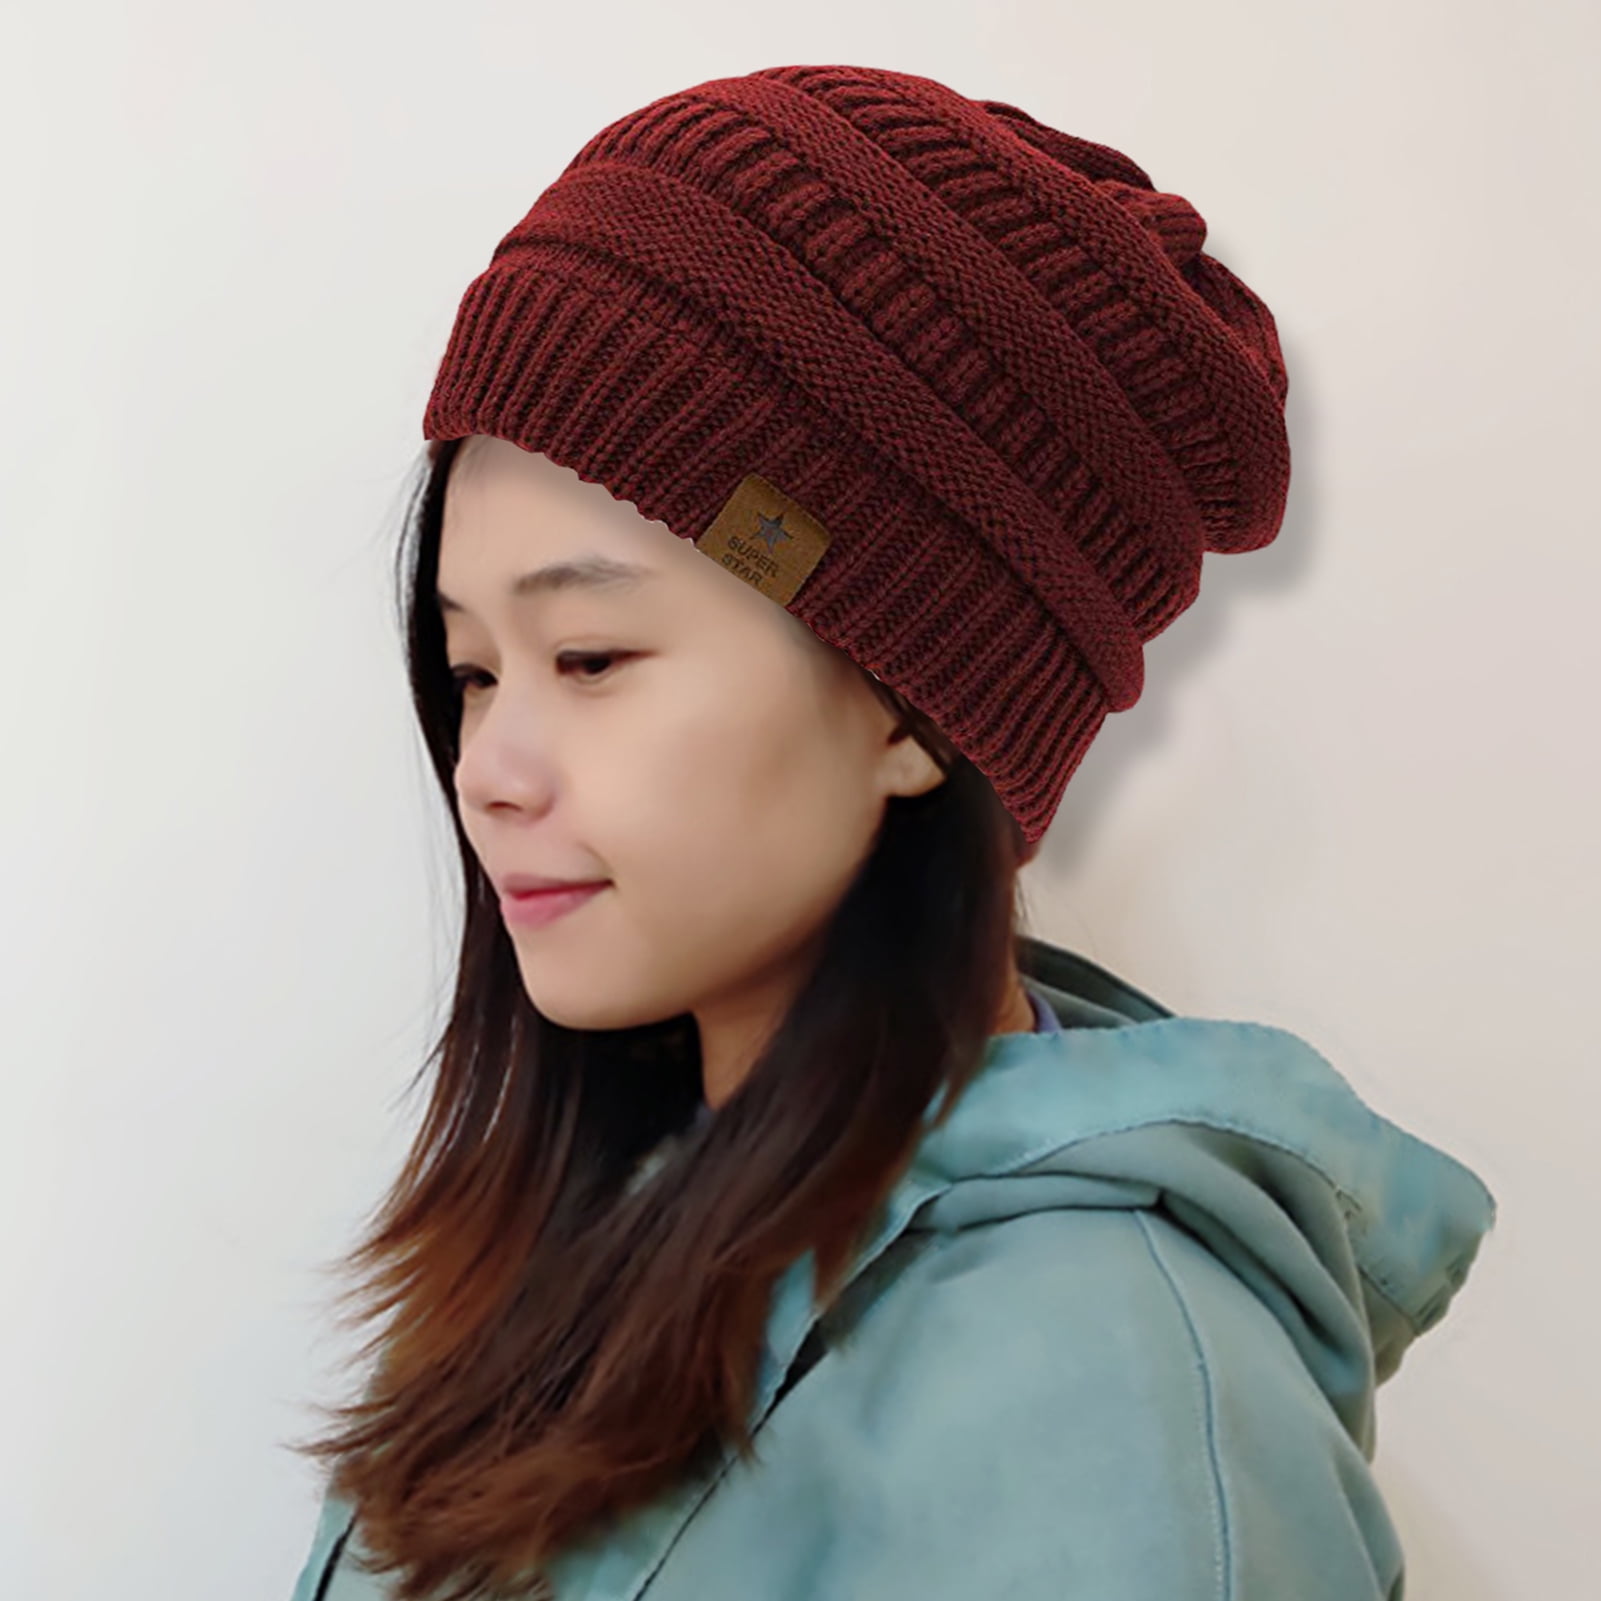 Beanie Hat for Women Outdoor Warm Winter Wool Knit Hats Soft Unisex Daily Cuffed Christmas Lights Ski Hats